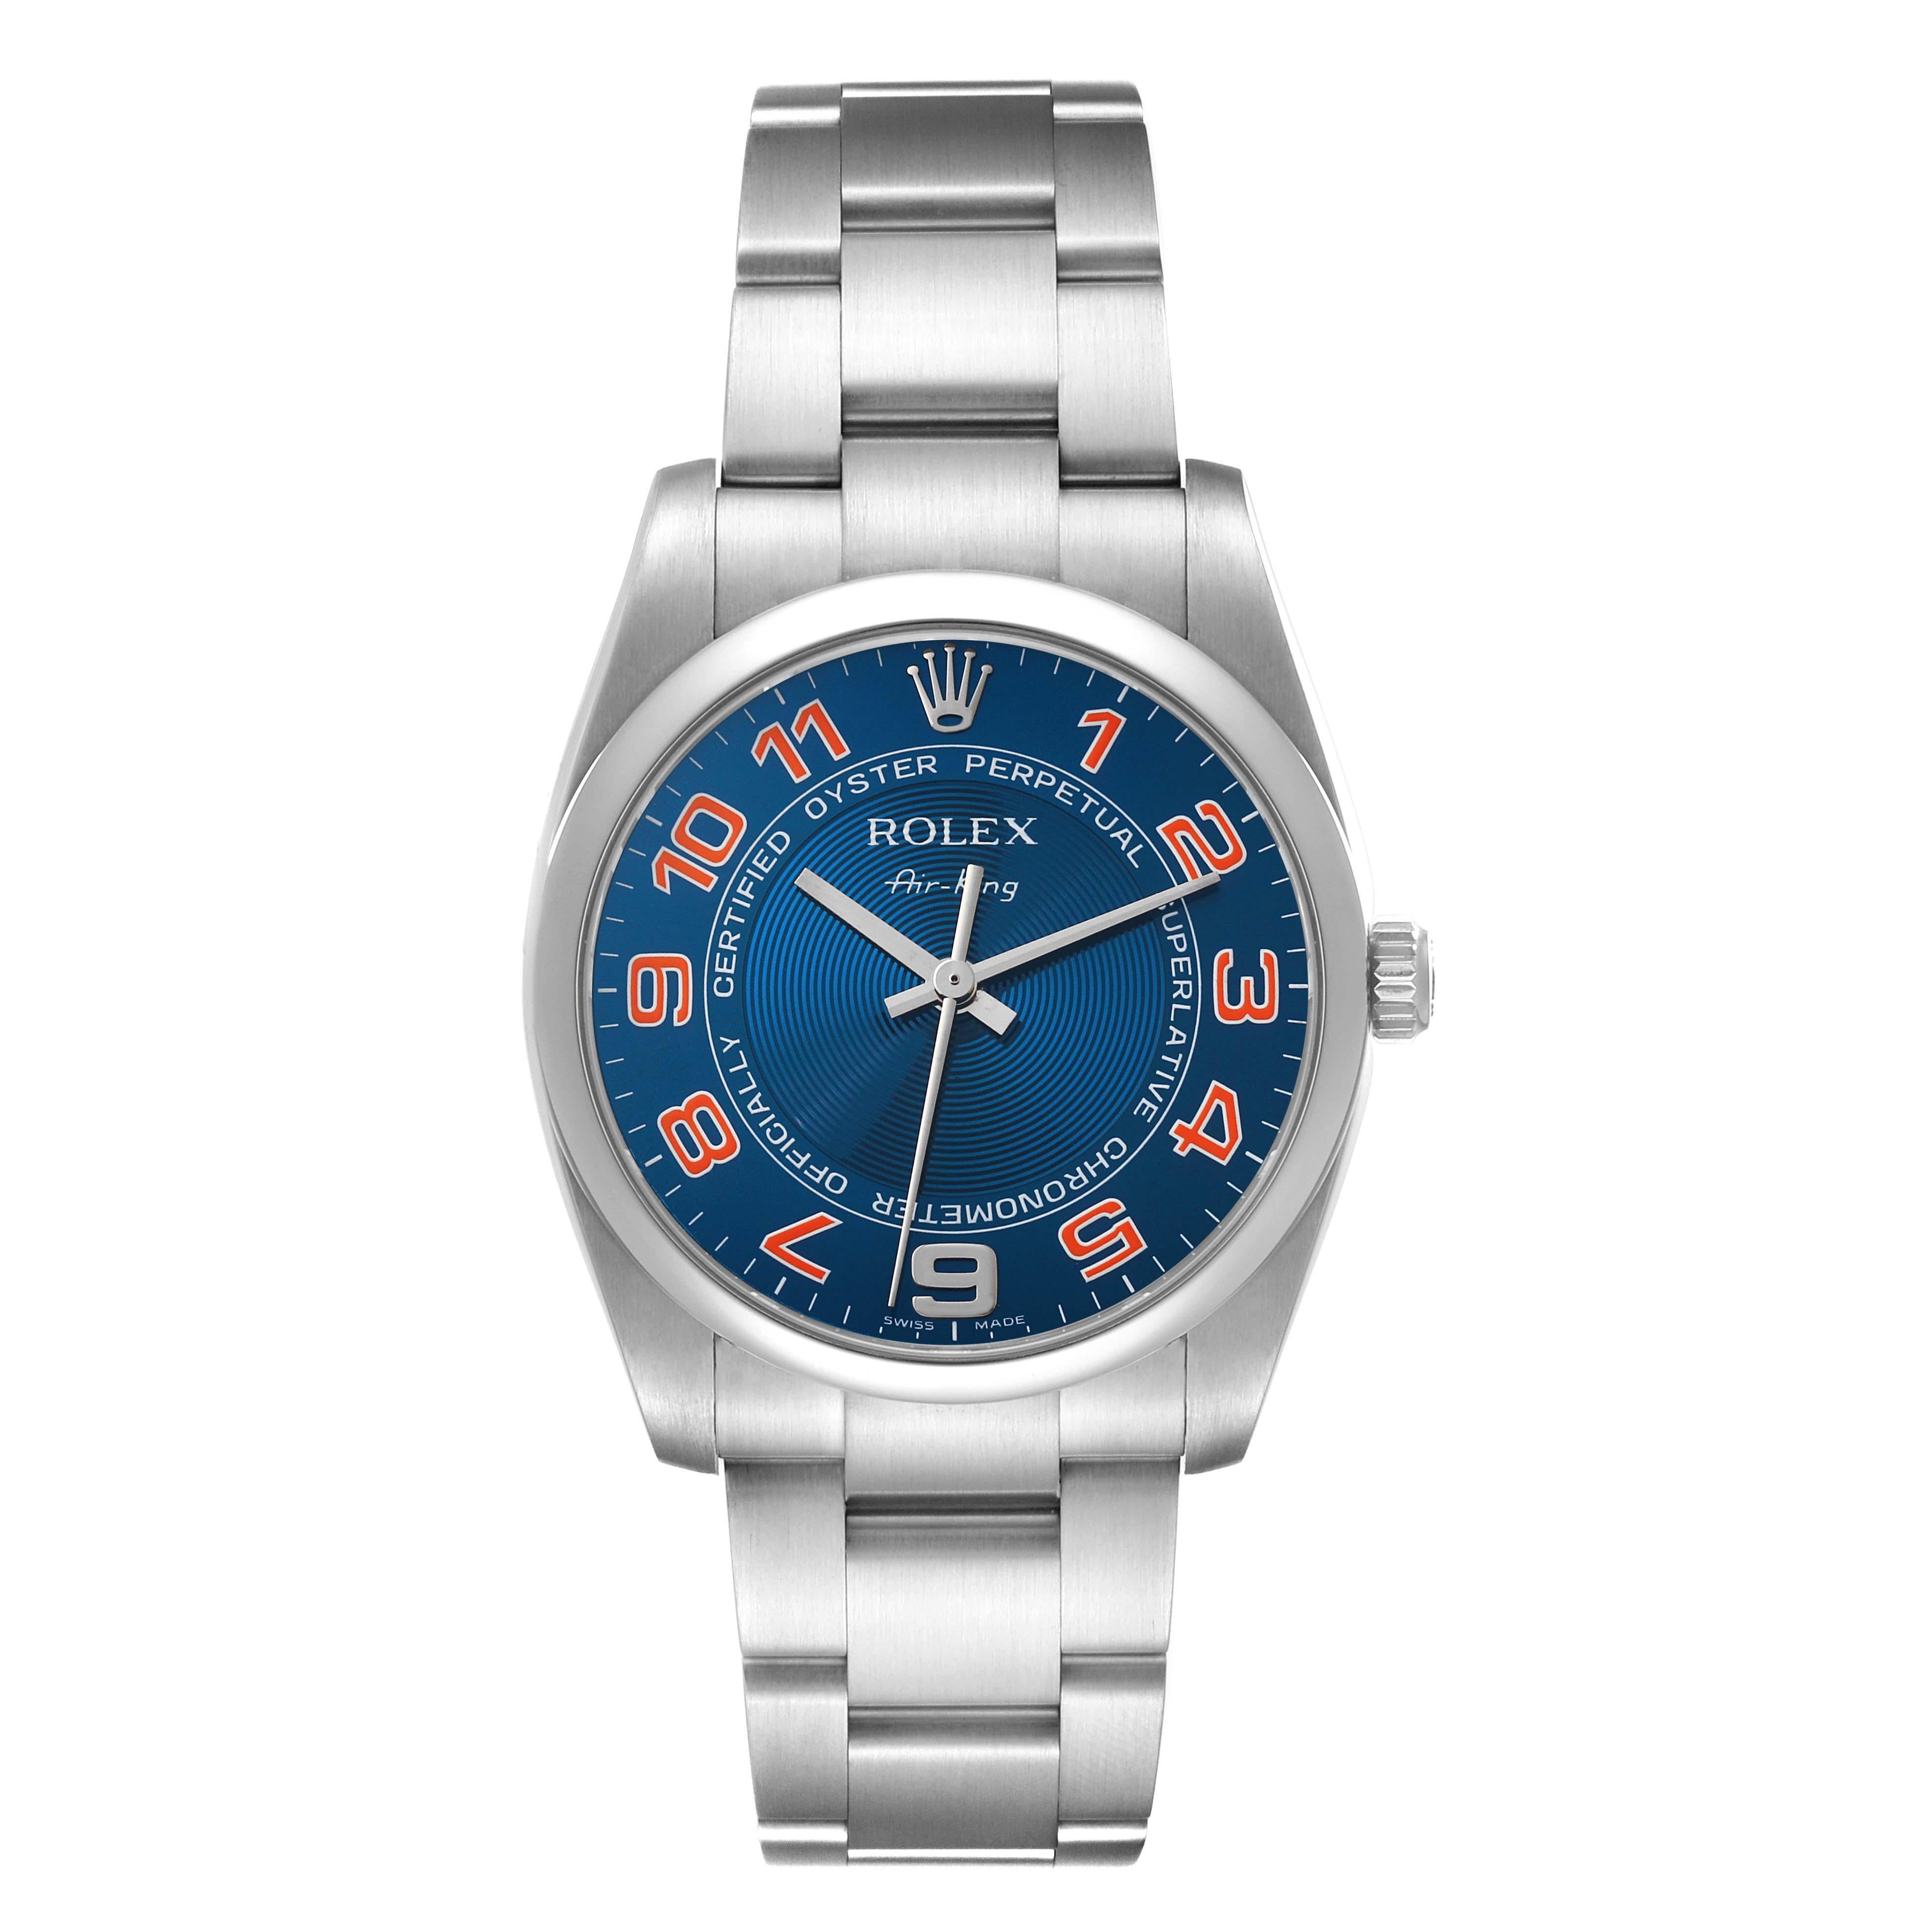 Rolex Air King Blue Concentric Dial Steel Mens Watch 114200 Box Card. Officially certified chronometer automatic self-winding movement. Stainless steel case 34.0 mm in diameter. Rolex logo on the crown. Stainless steel smooth domed bezel. Scratch